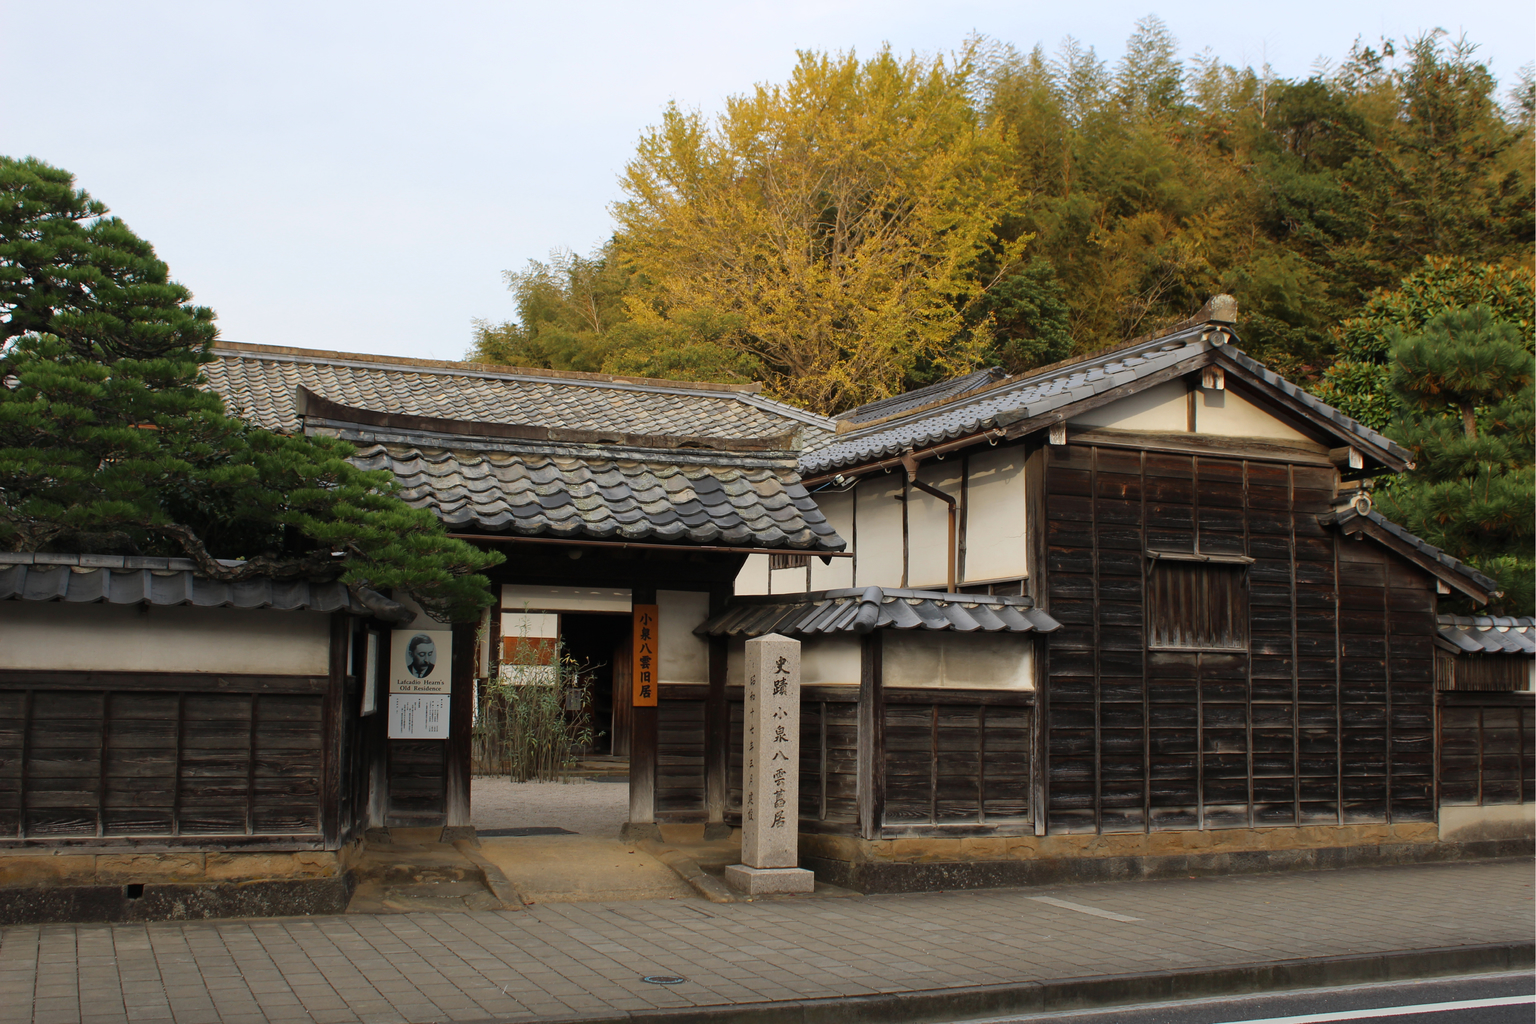 Lafcadio Hearn’s Matsue – The Chief City of the Province of the Gods